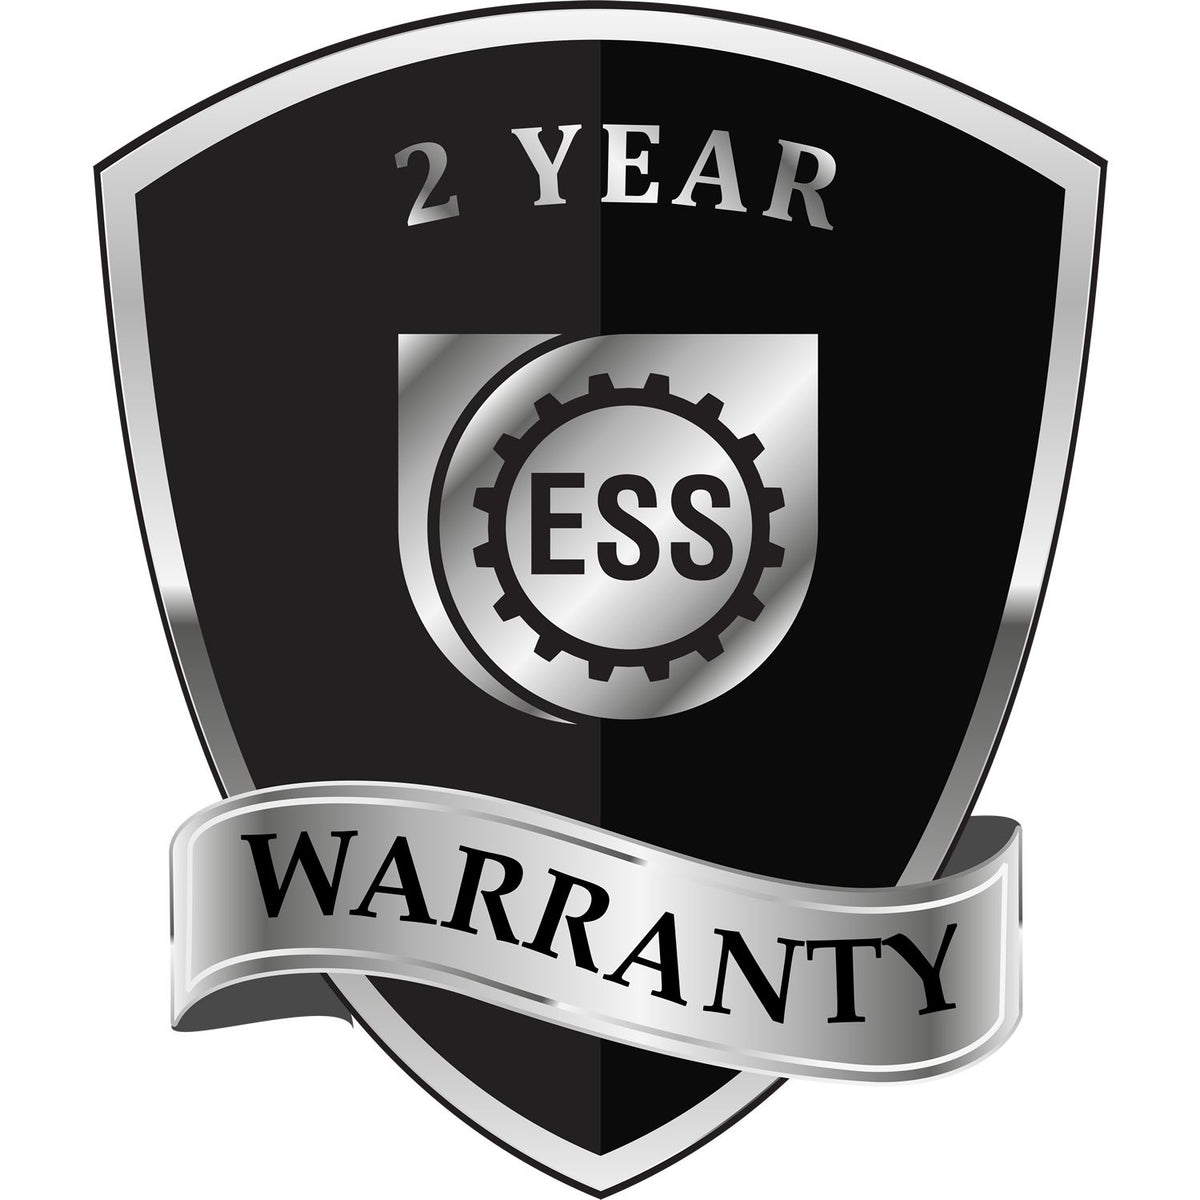 A black and silver badge or emblem showing warranty information for the Handheld Illinois Professional Geologist Embosser